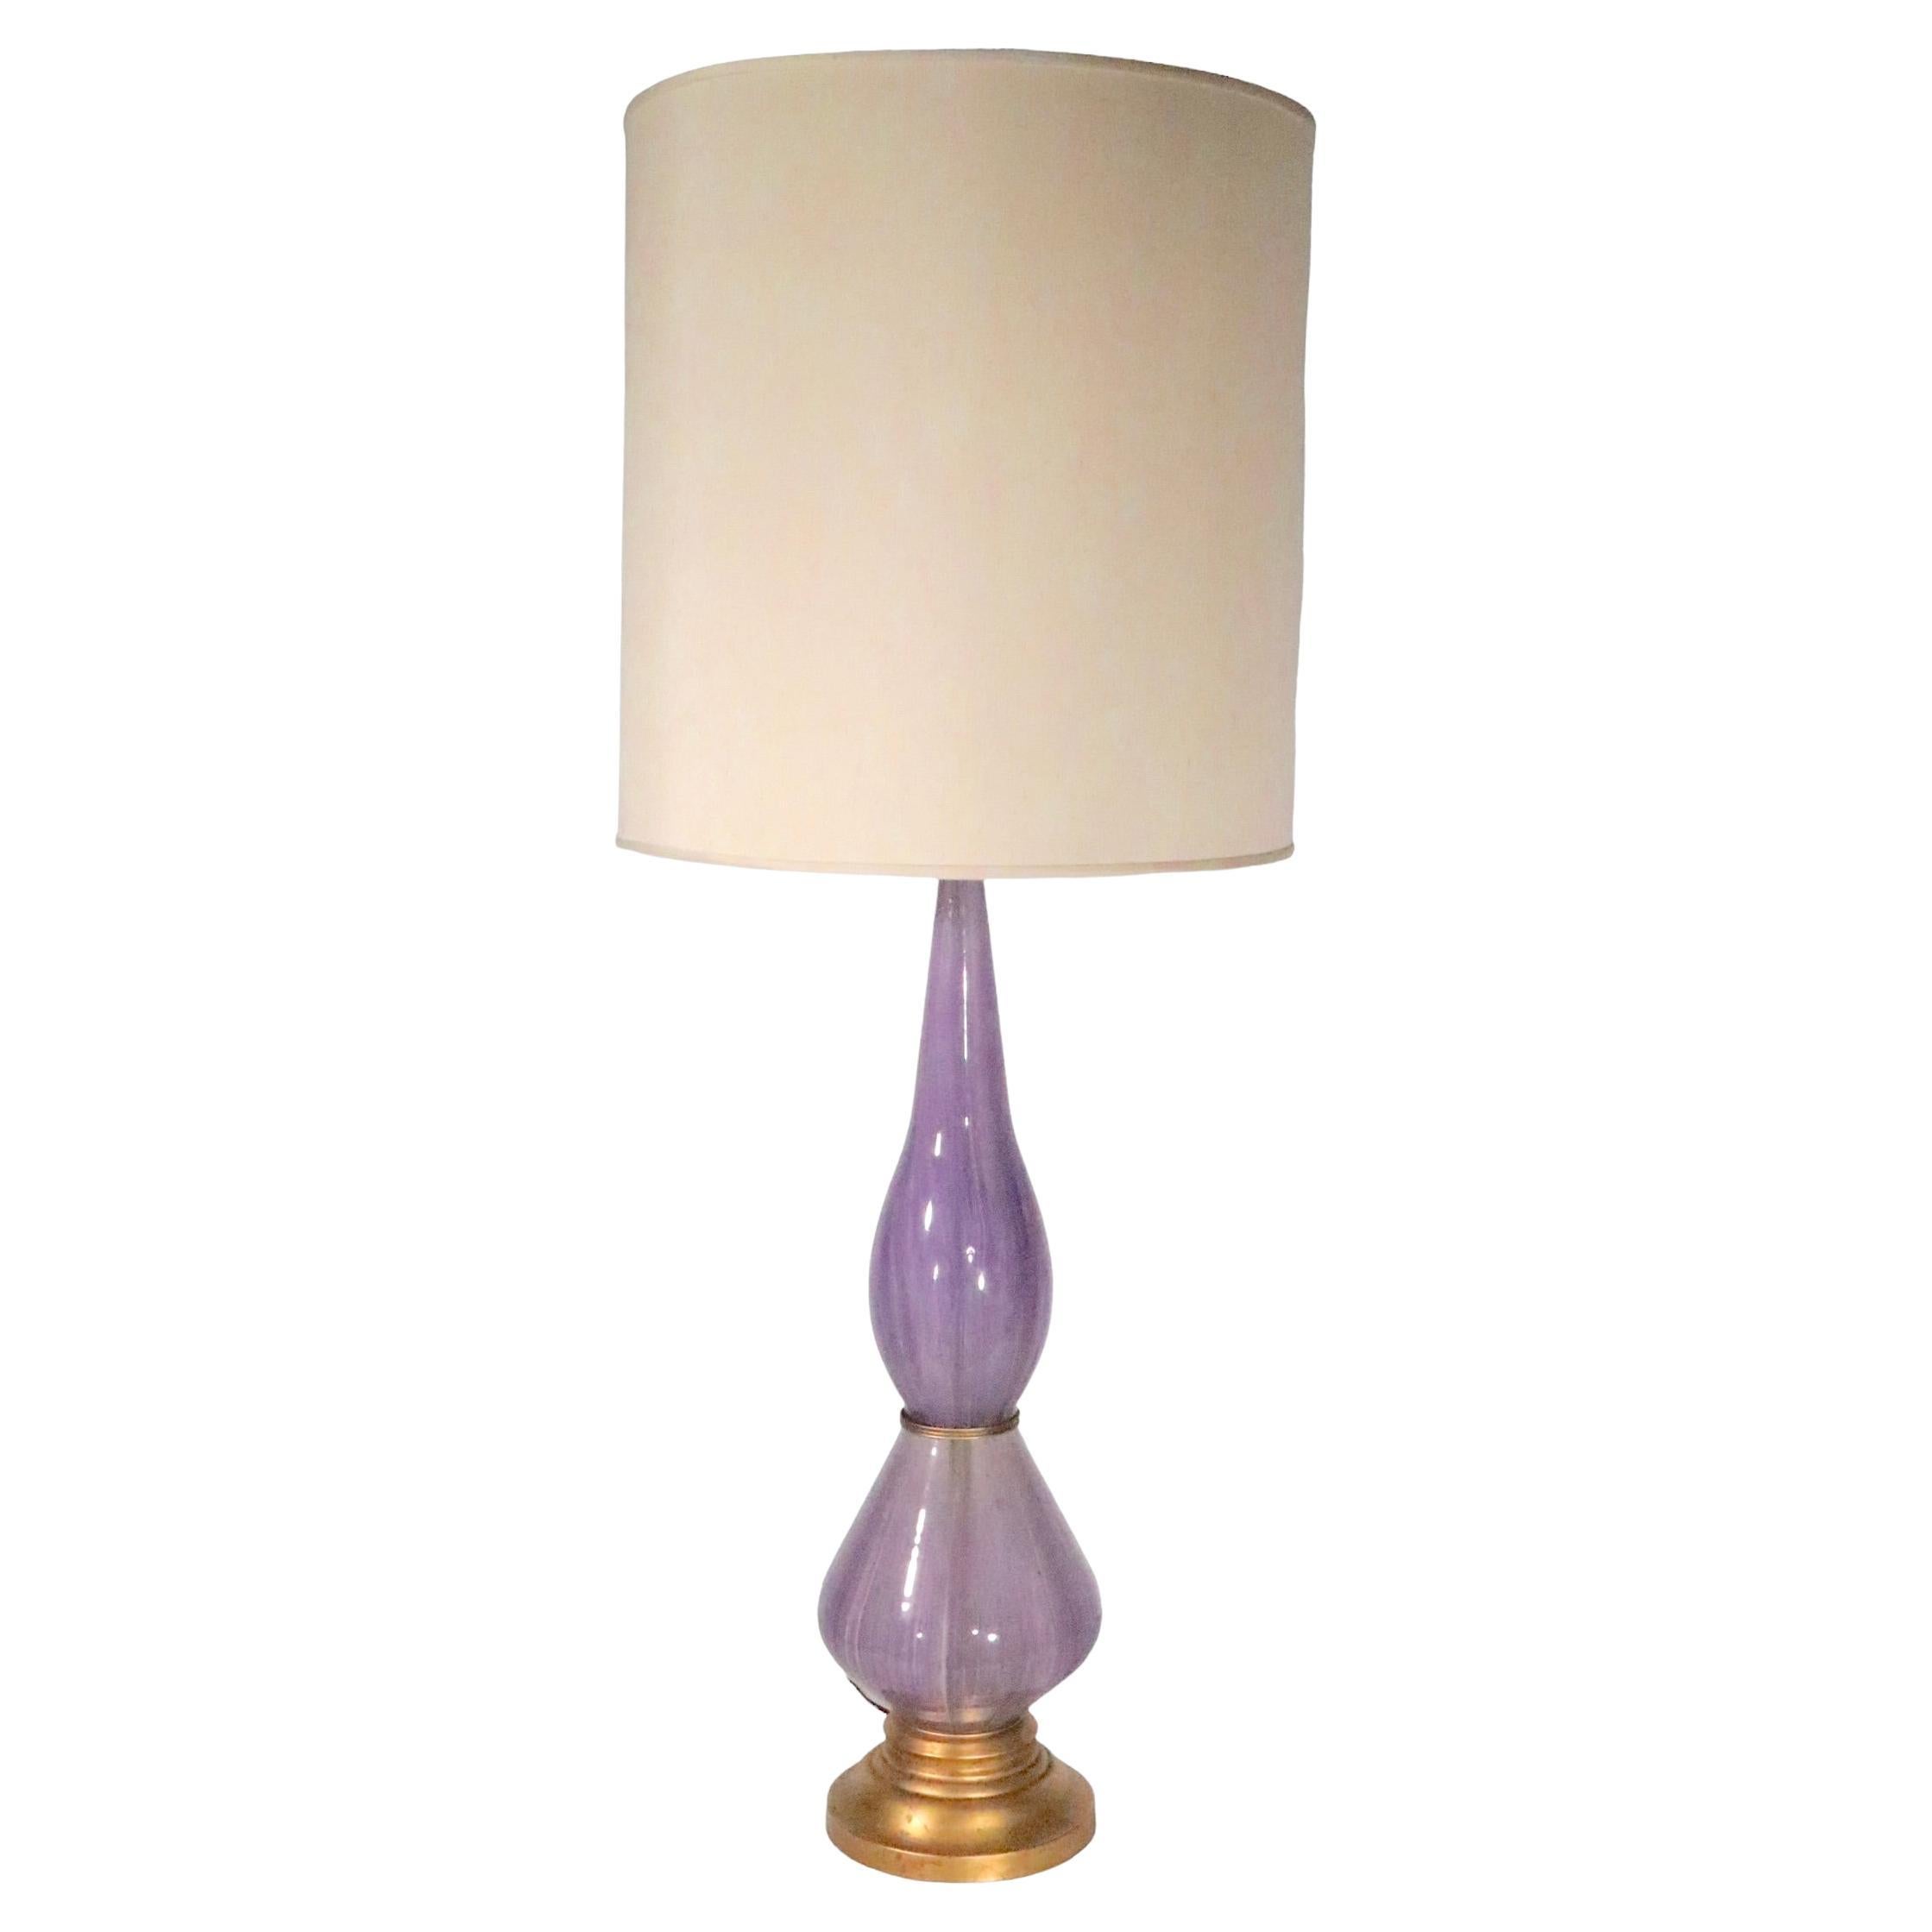 Large Murano Glass Table Lamp in Lavender Glass, circa 1950/1960s